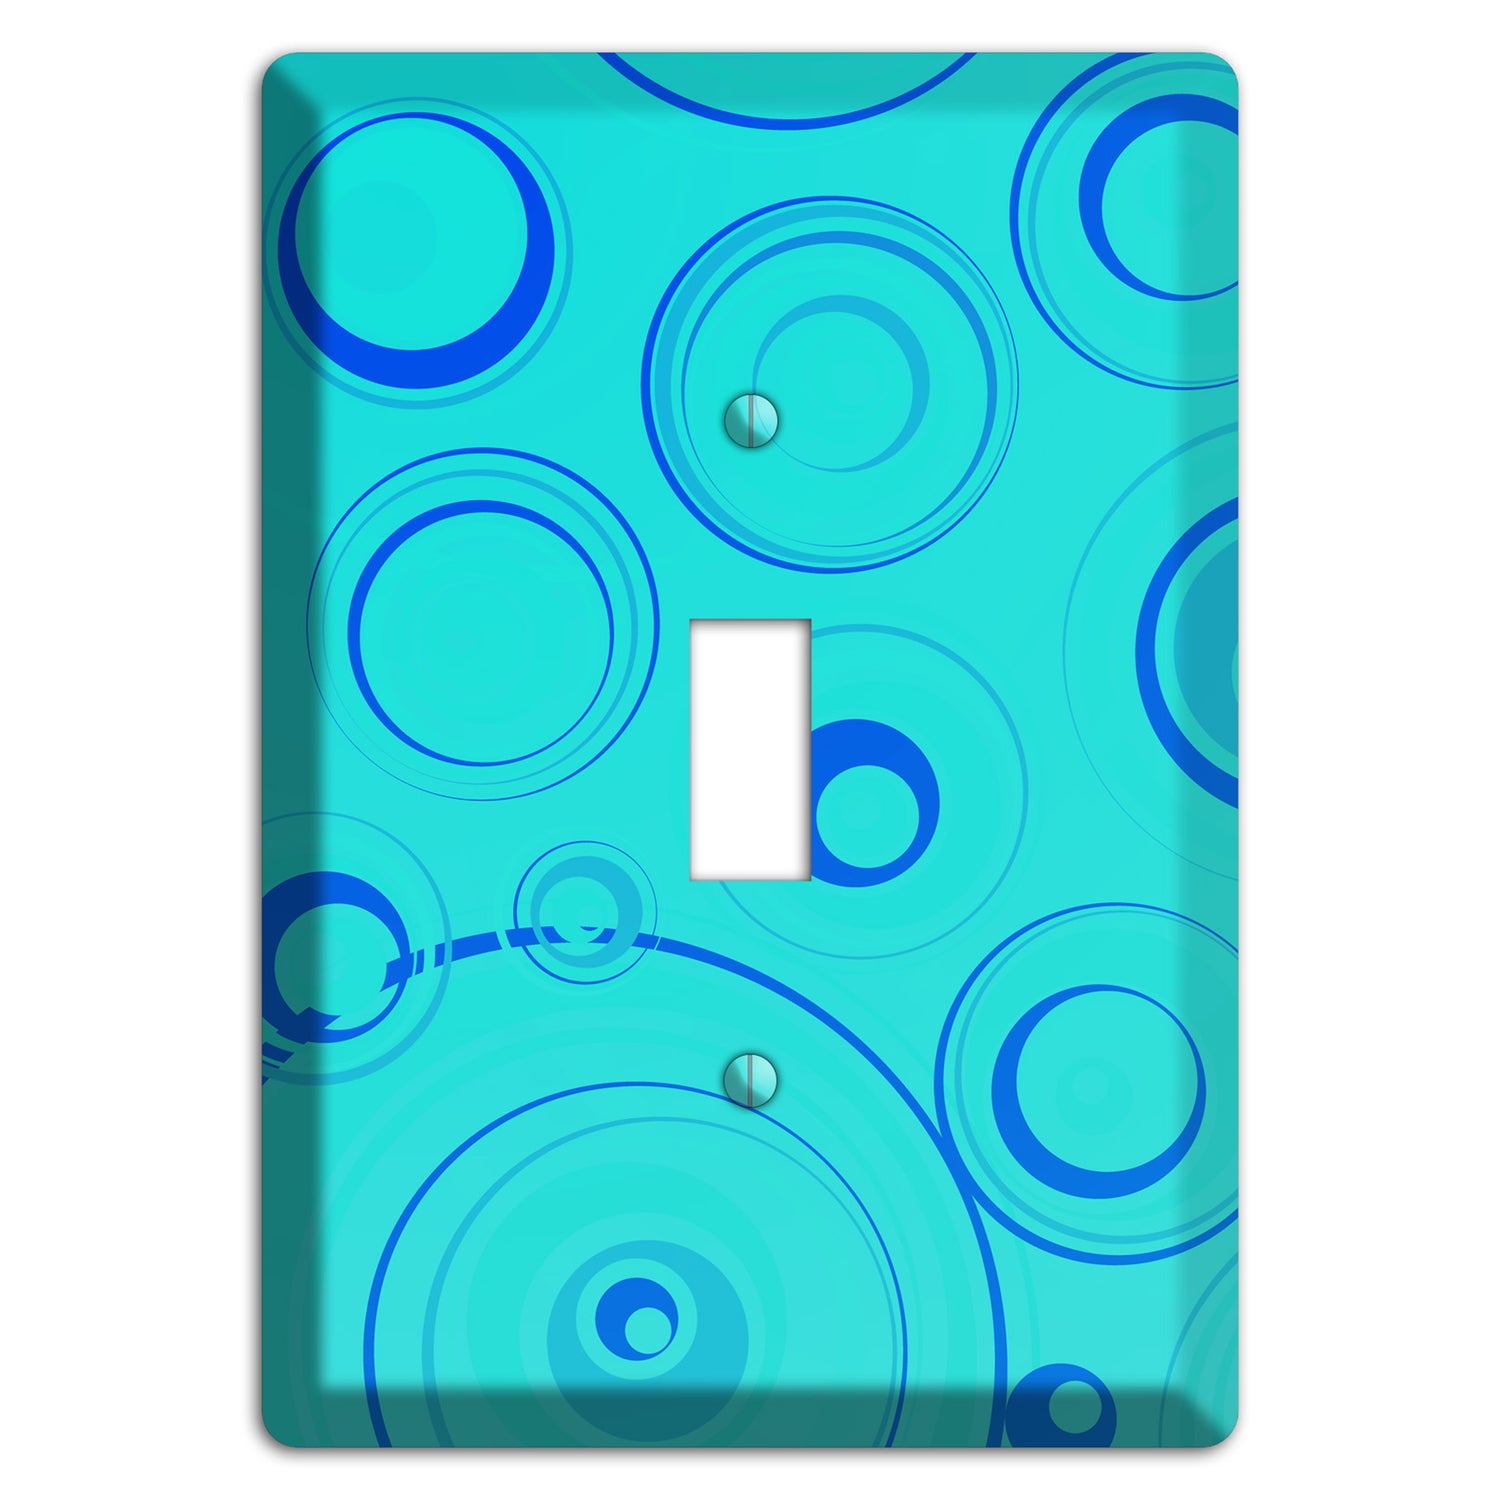 Turquoise Circles Cover Plates